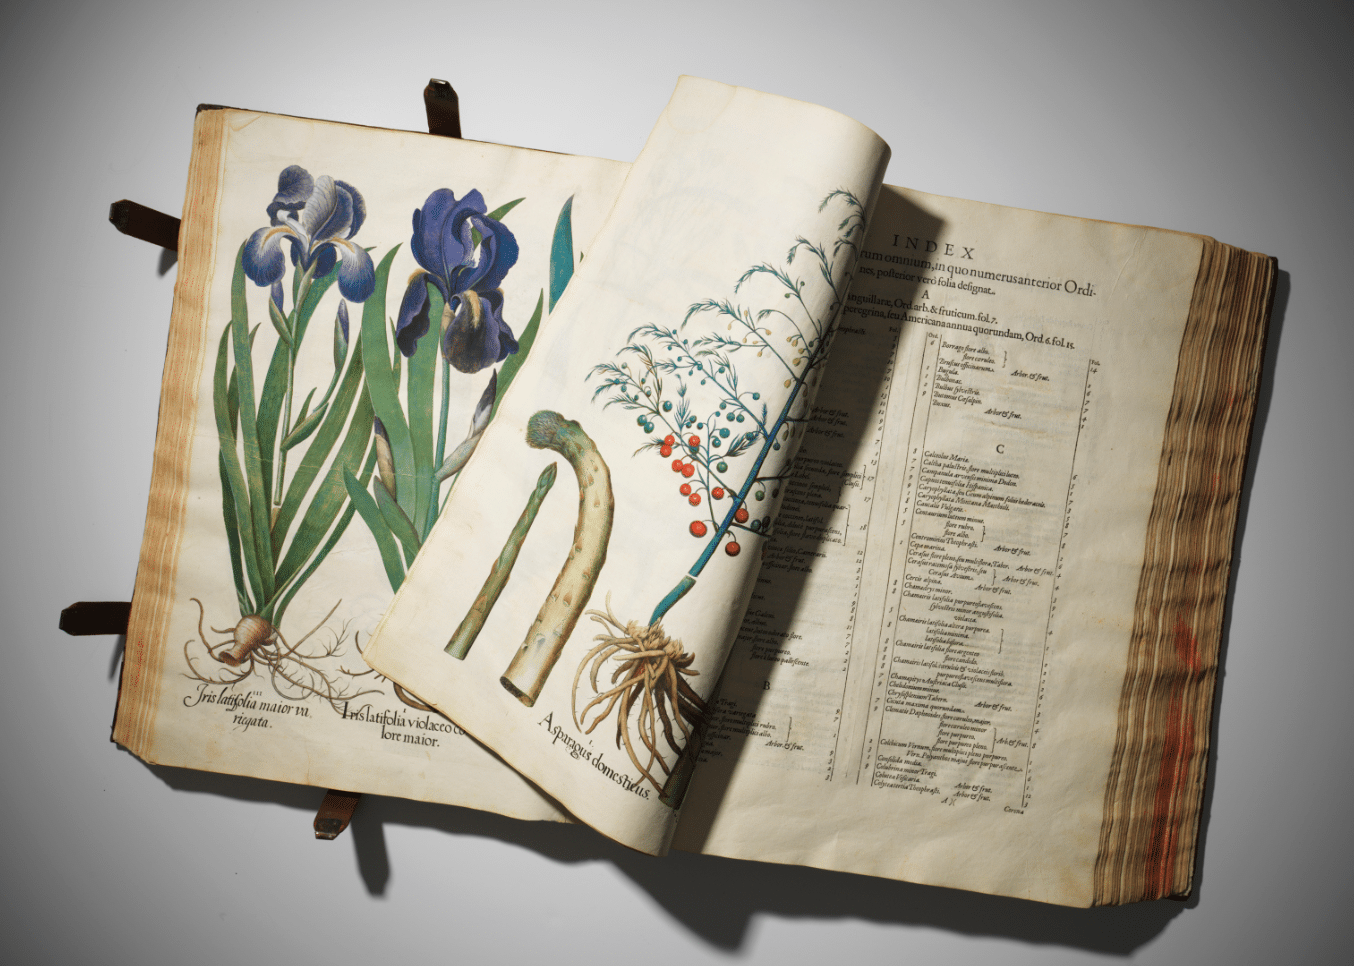 Besler's magnificent florilegium was the first of all great botanical books